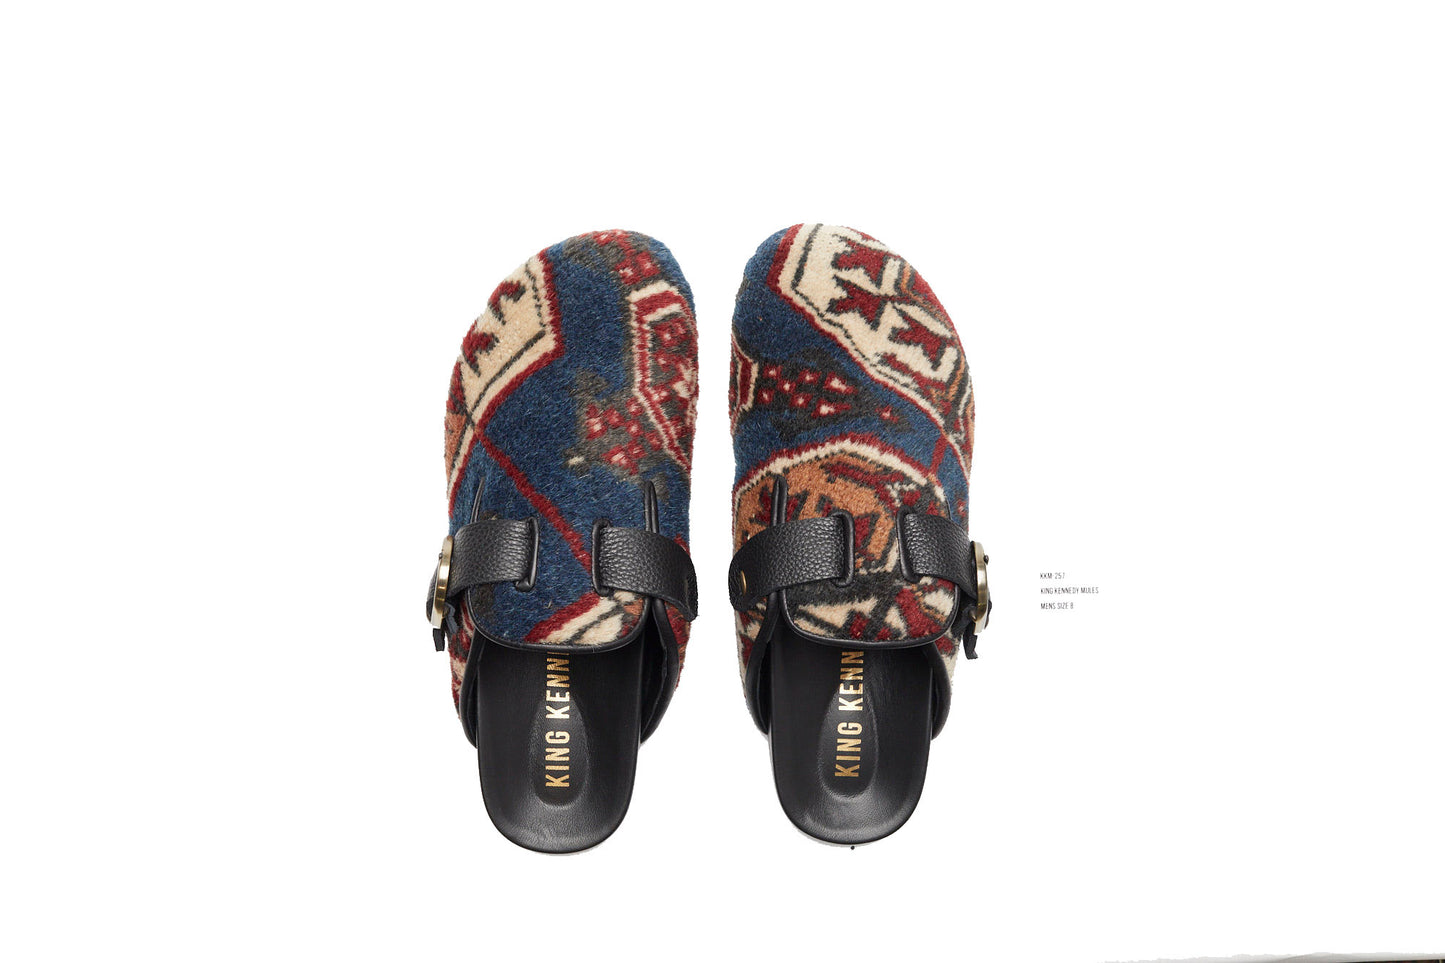 King Kennedy Rug Mules are one-of-a-kind and made of 100 year old antique Persian rug fragments with soft lambskin footbed and rubber sole. This pair is made of an antique Persian rug with deep blue base and cream, red and tan medallion designs. 